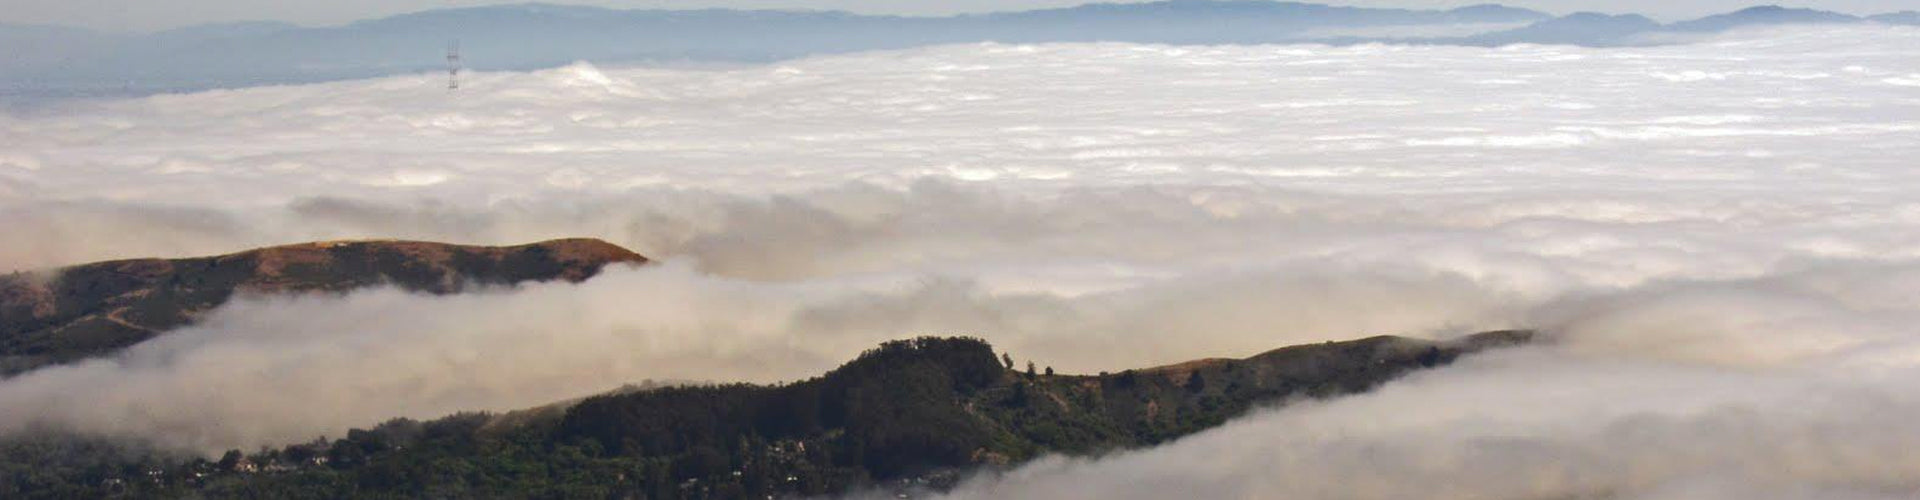 Fog blowing into California from the Pacific Ocean